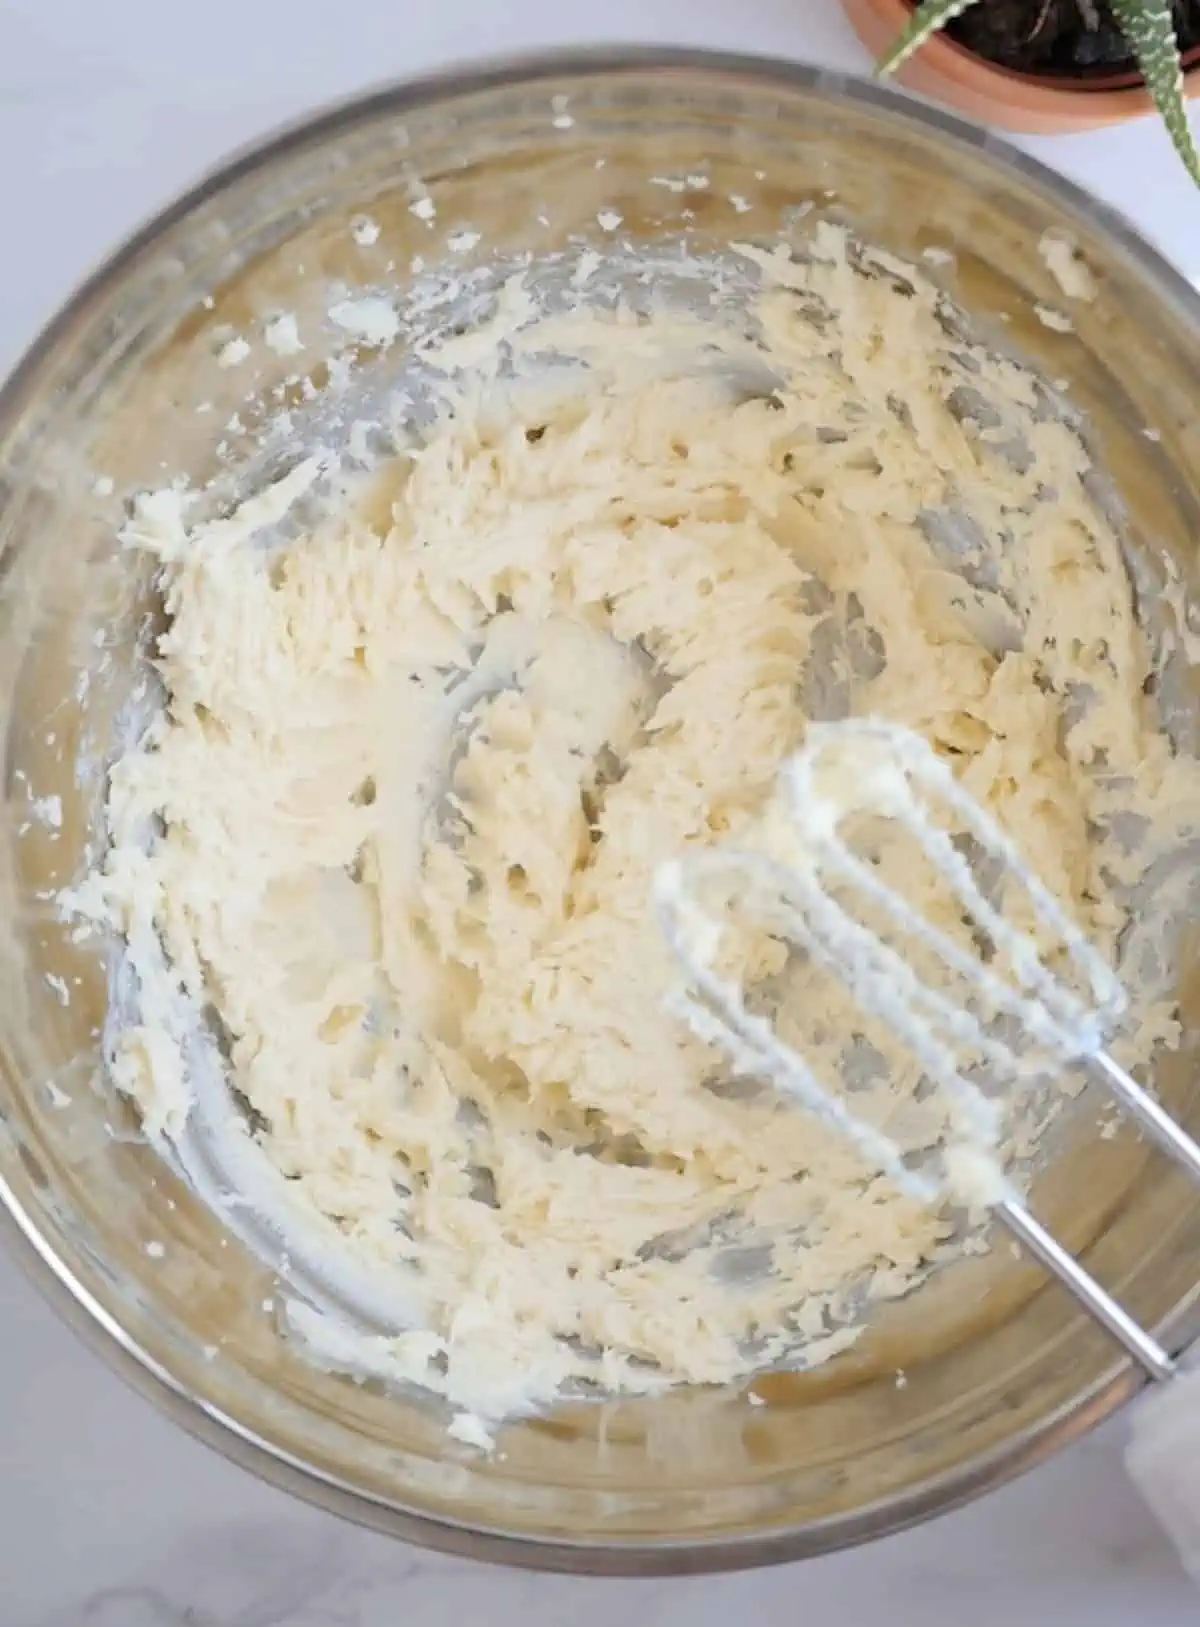 Vegan butter and sugar beaten together with an electric hand mixer.